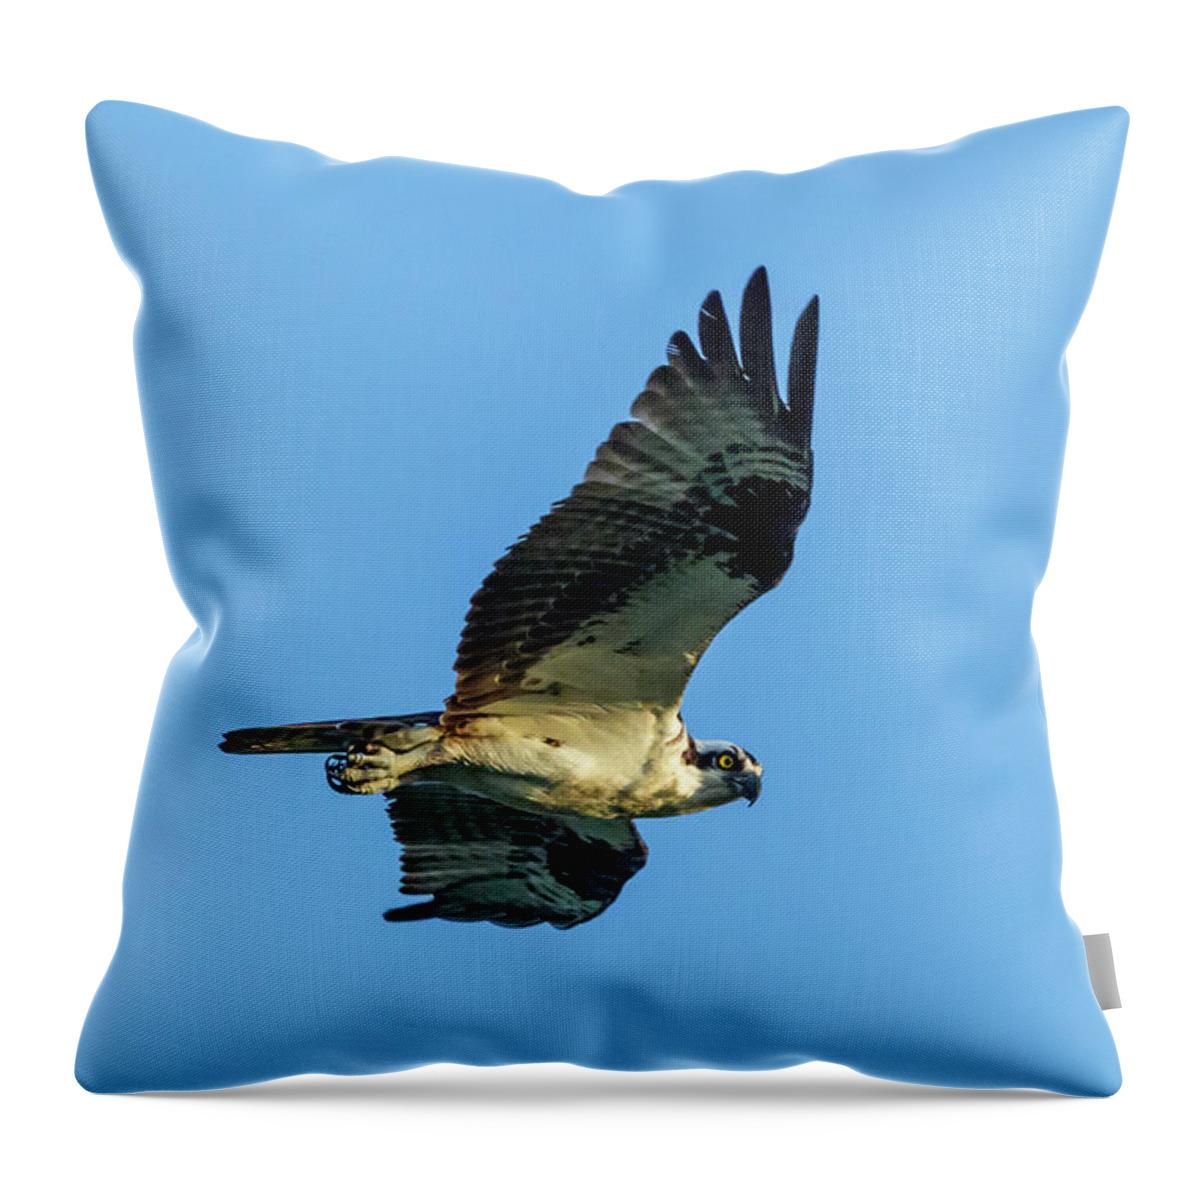 Swr Throw Pillow featuring the photograph Focus by Ray Silva